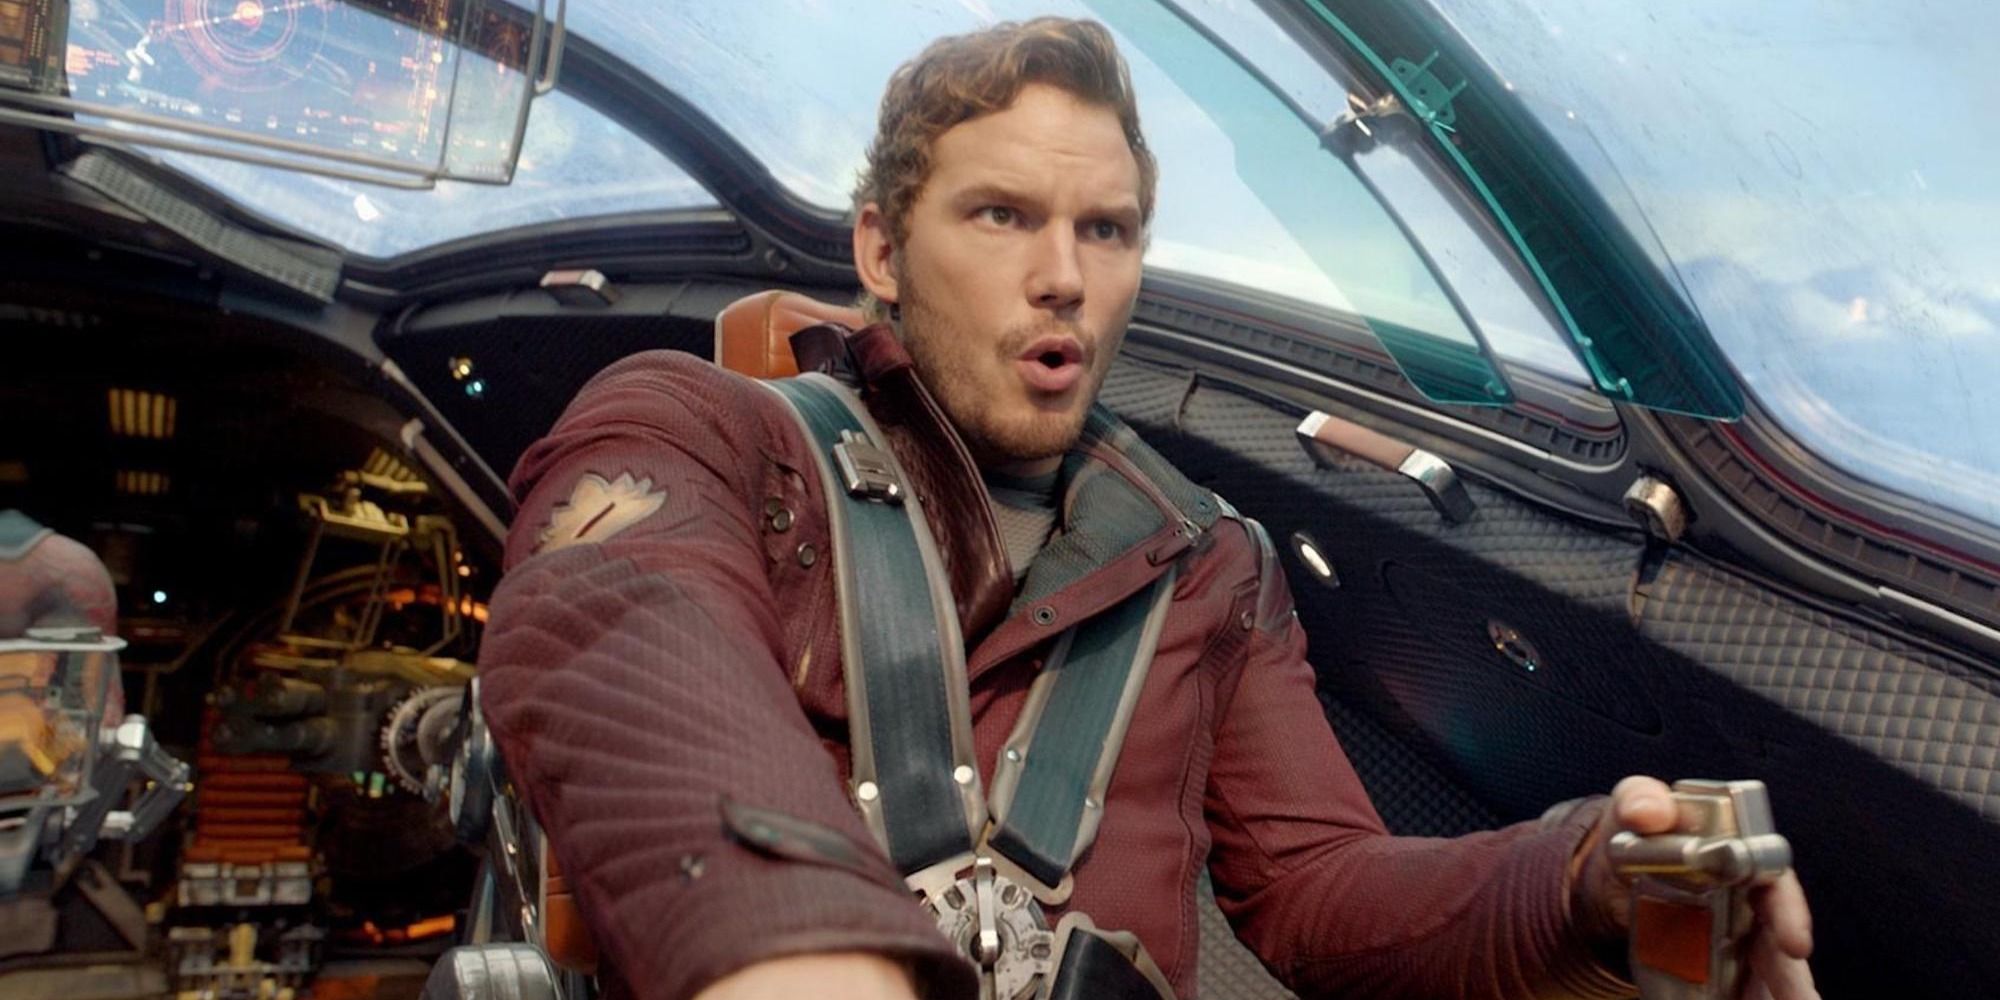 Guardians of the Galaxy Peter Quill piloting ship